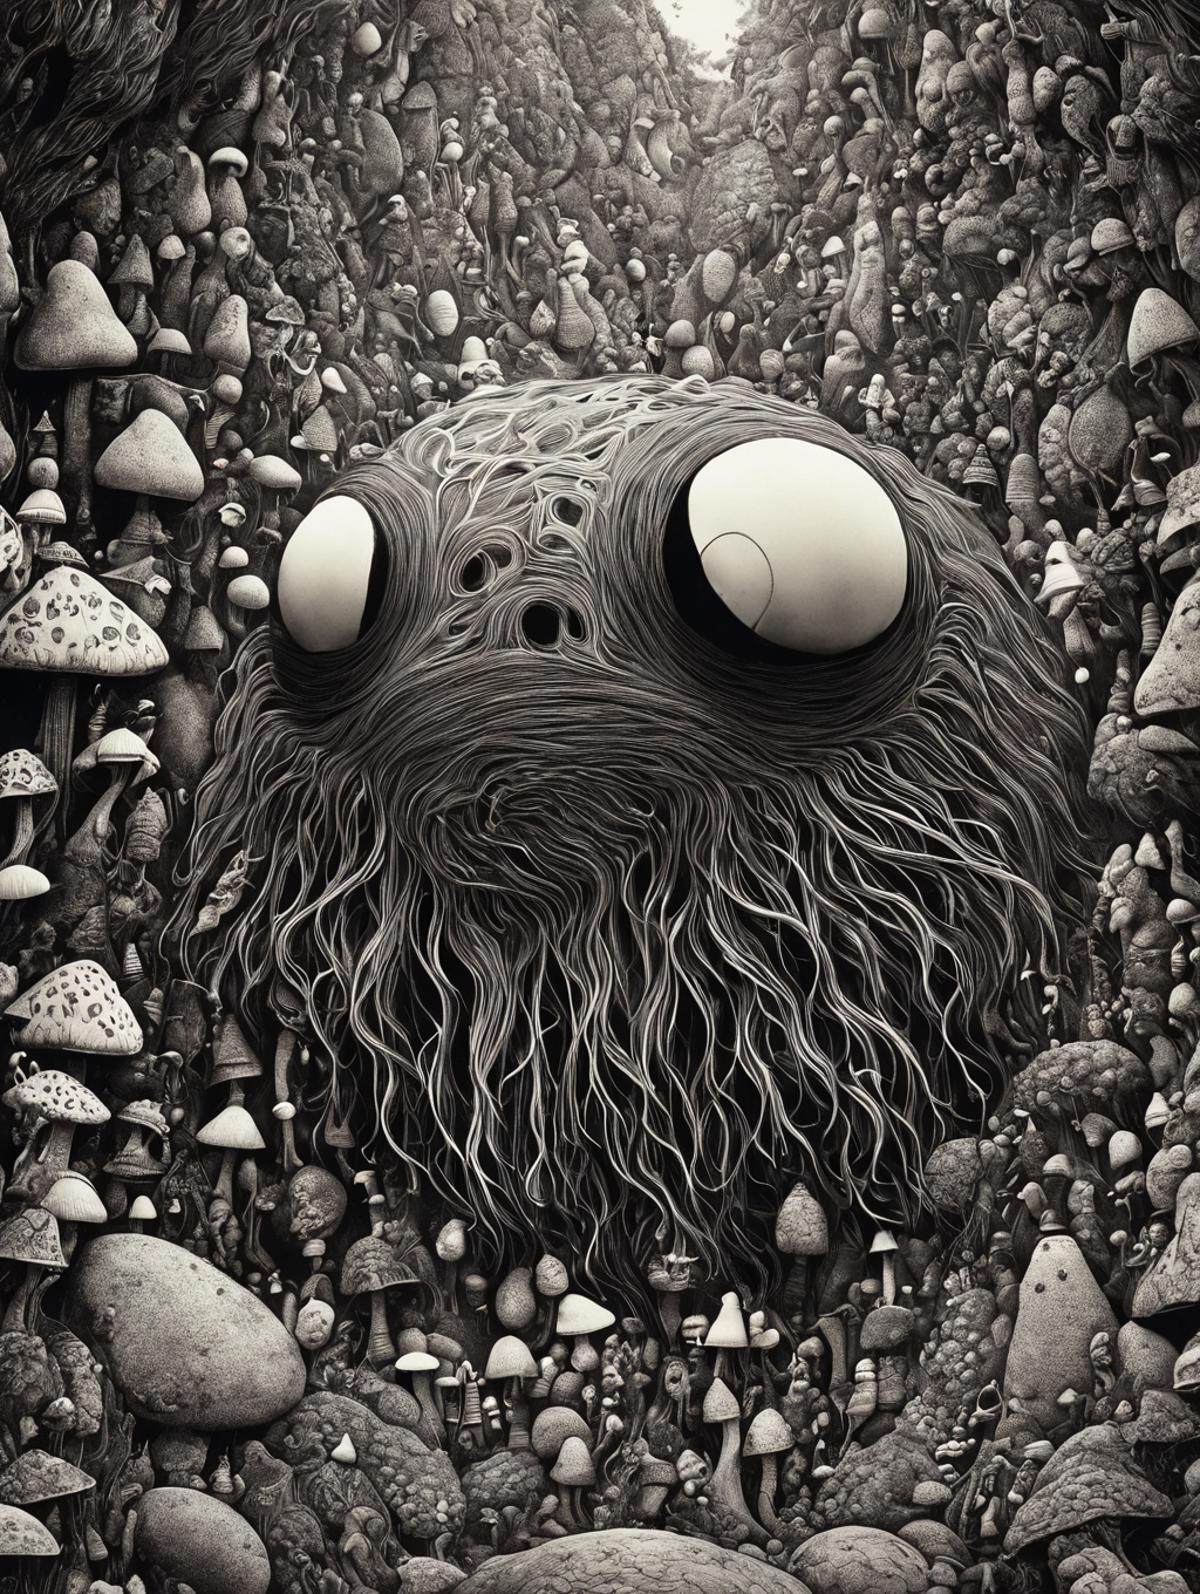 A cartoon drawing of a creature with a large eye, surrounded by a dense forest of mushrooms and rocks.